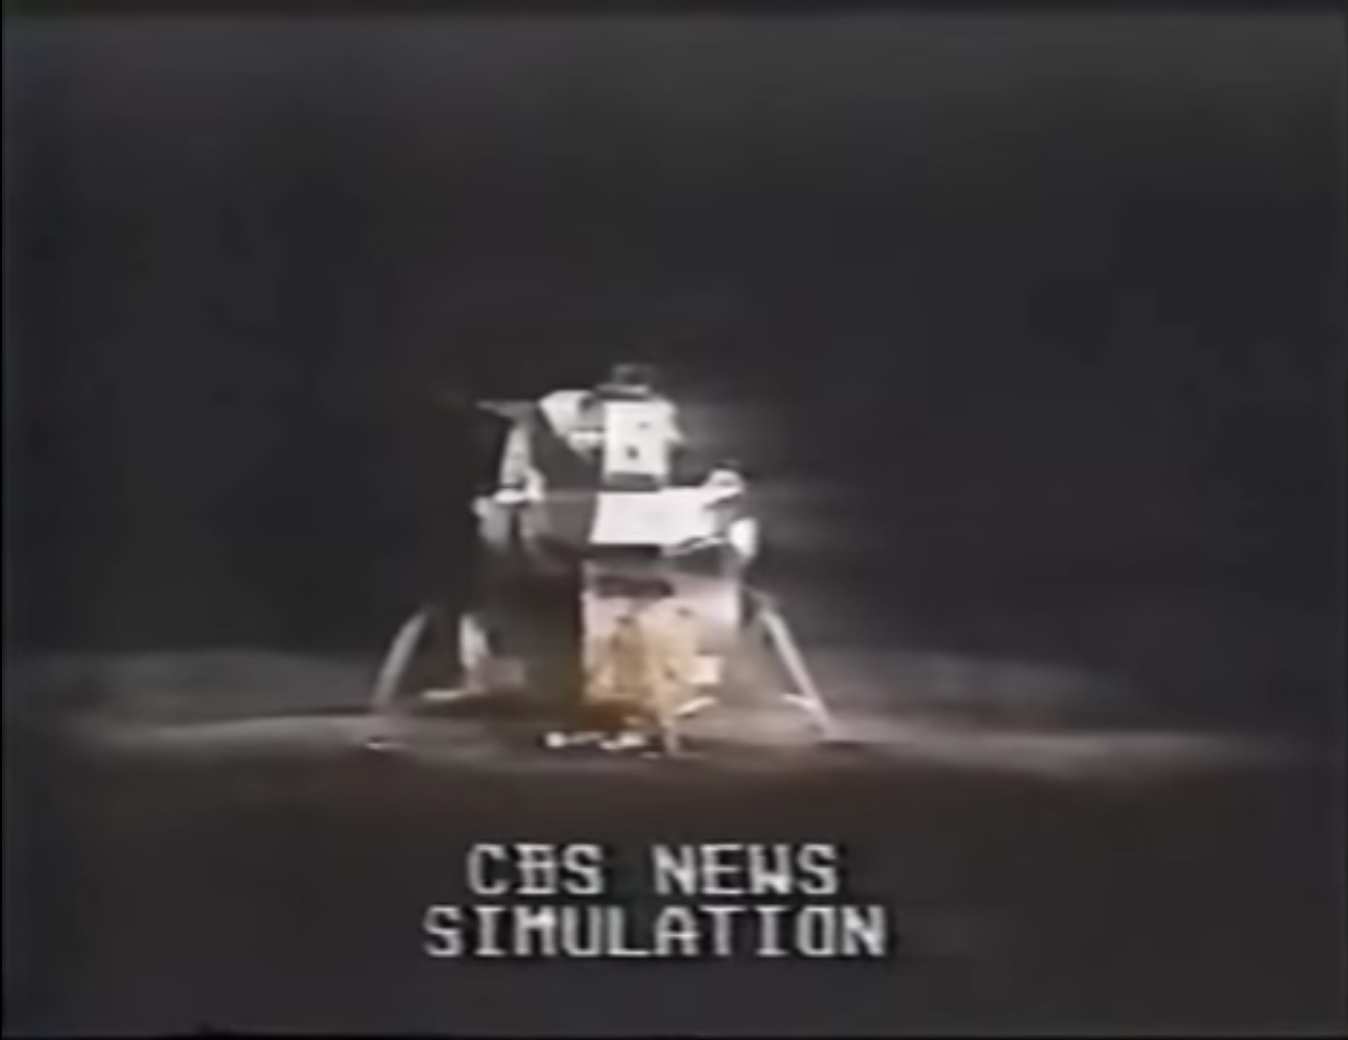 CBS News simulation of the lunar module on the moon